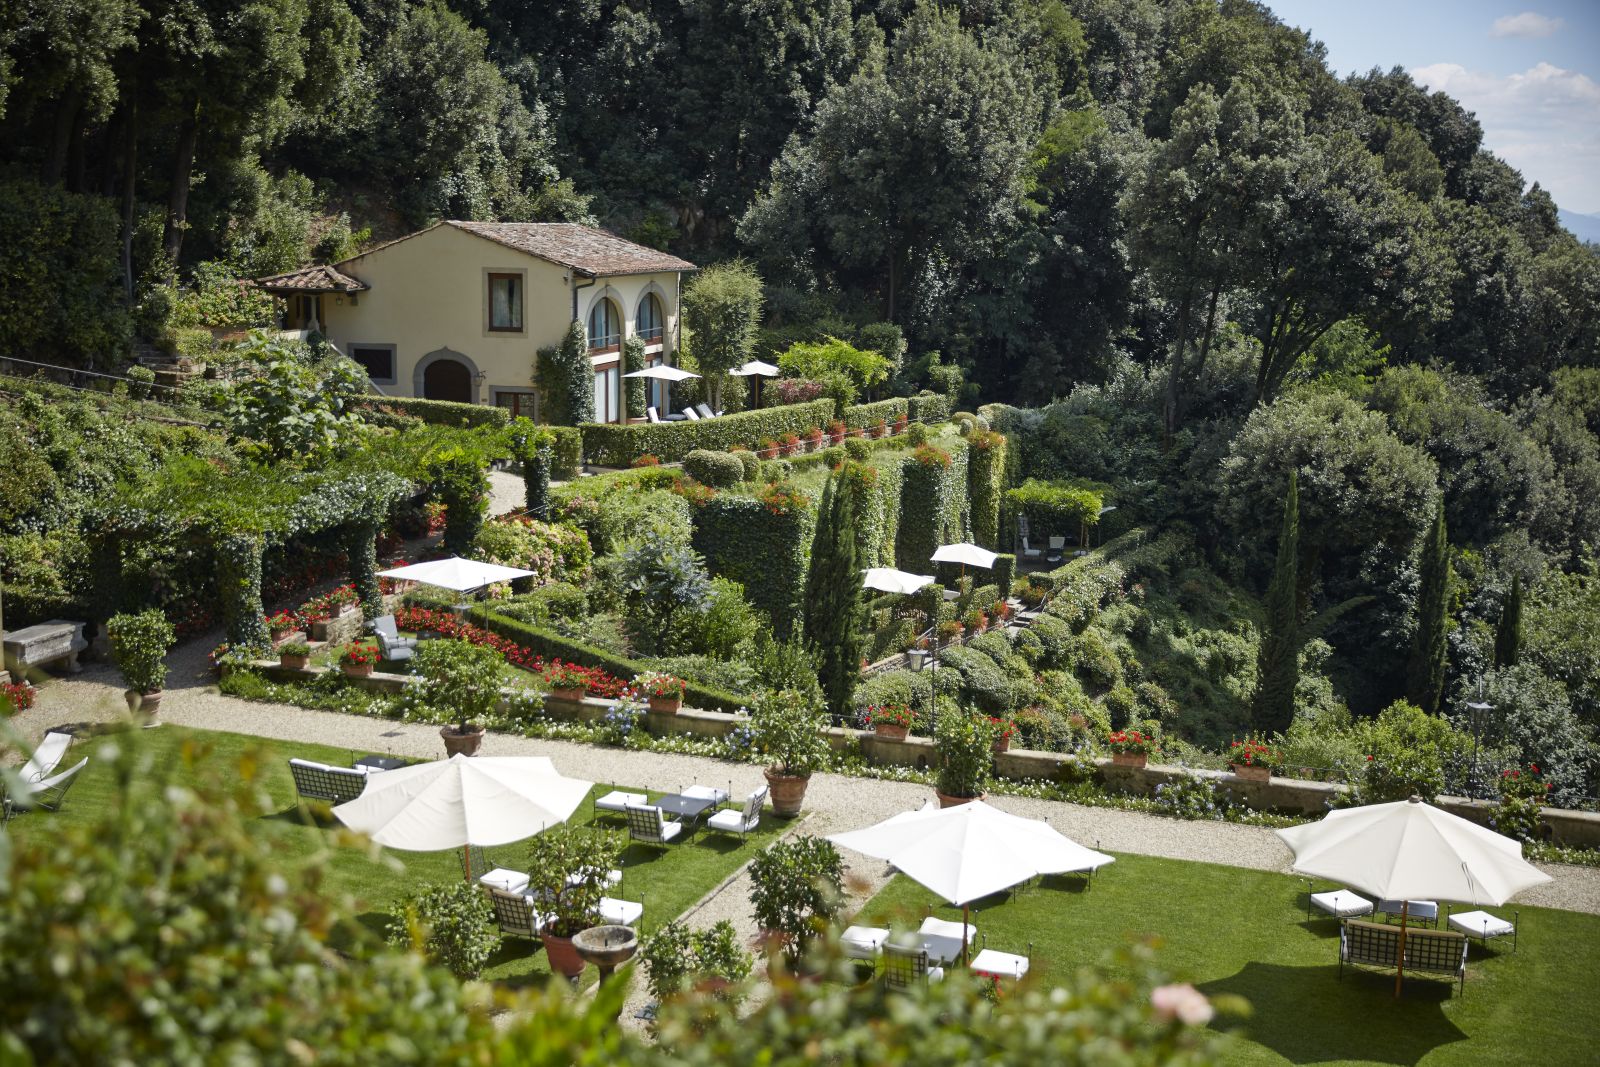 The grounds and surrounding countryside at Belmond Villa San Michele in Florence